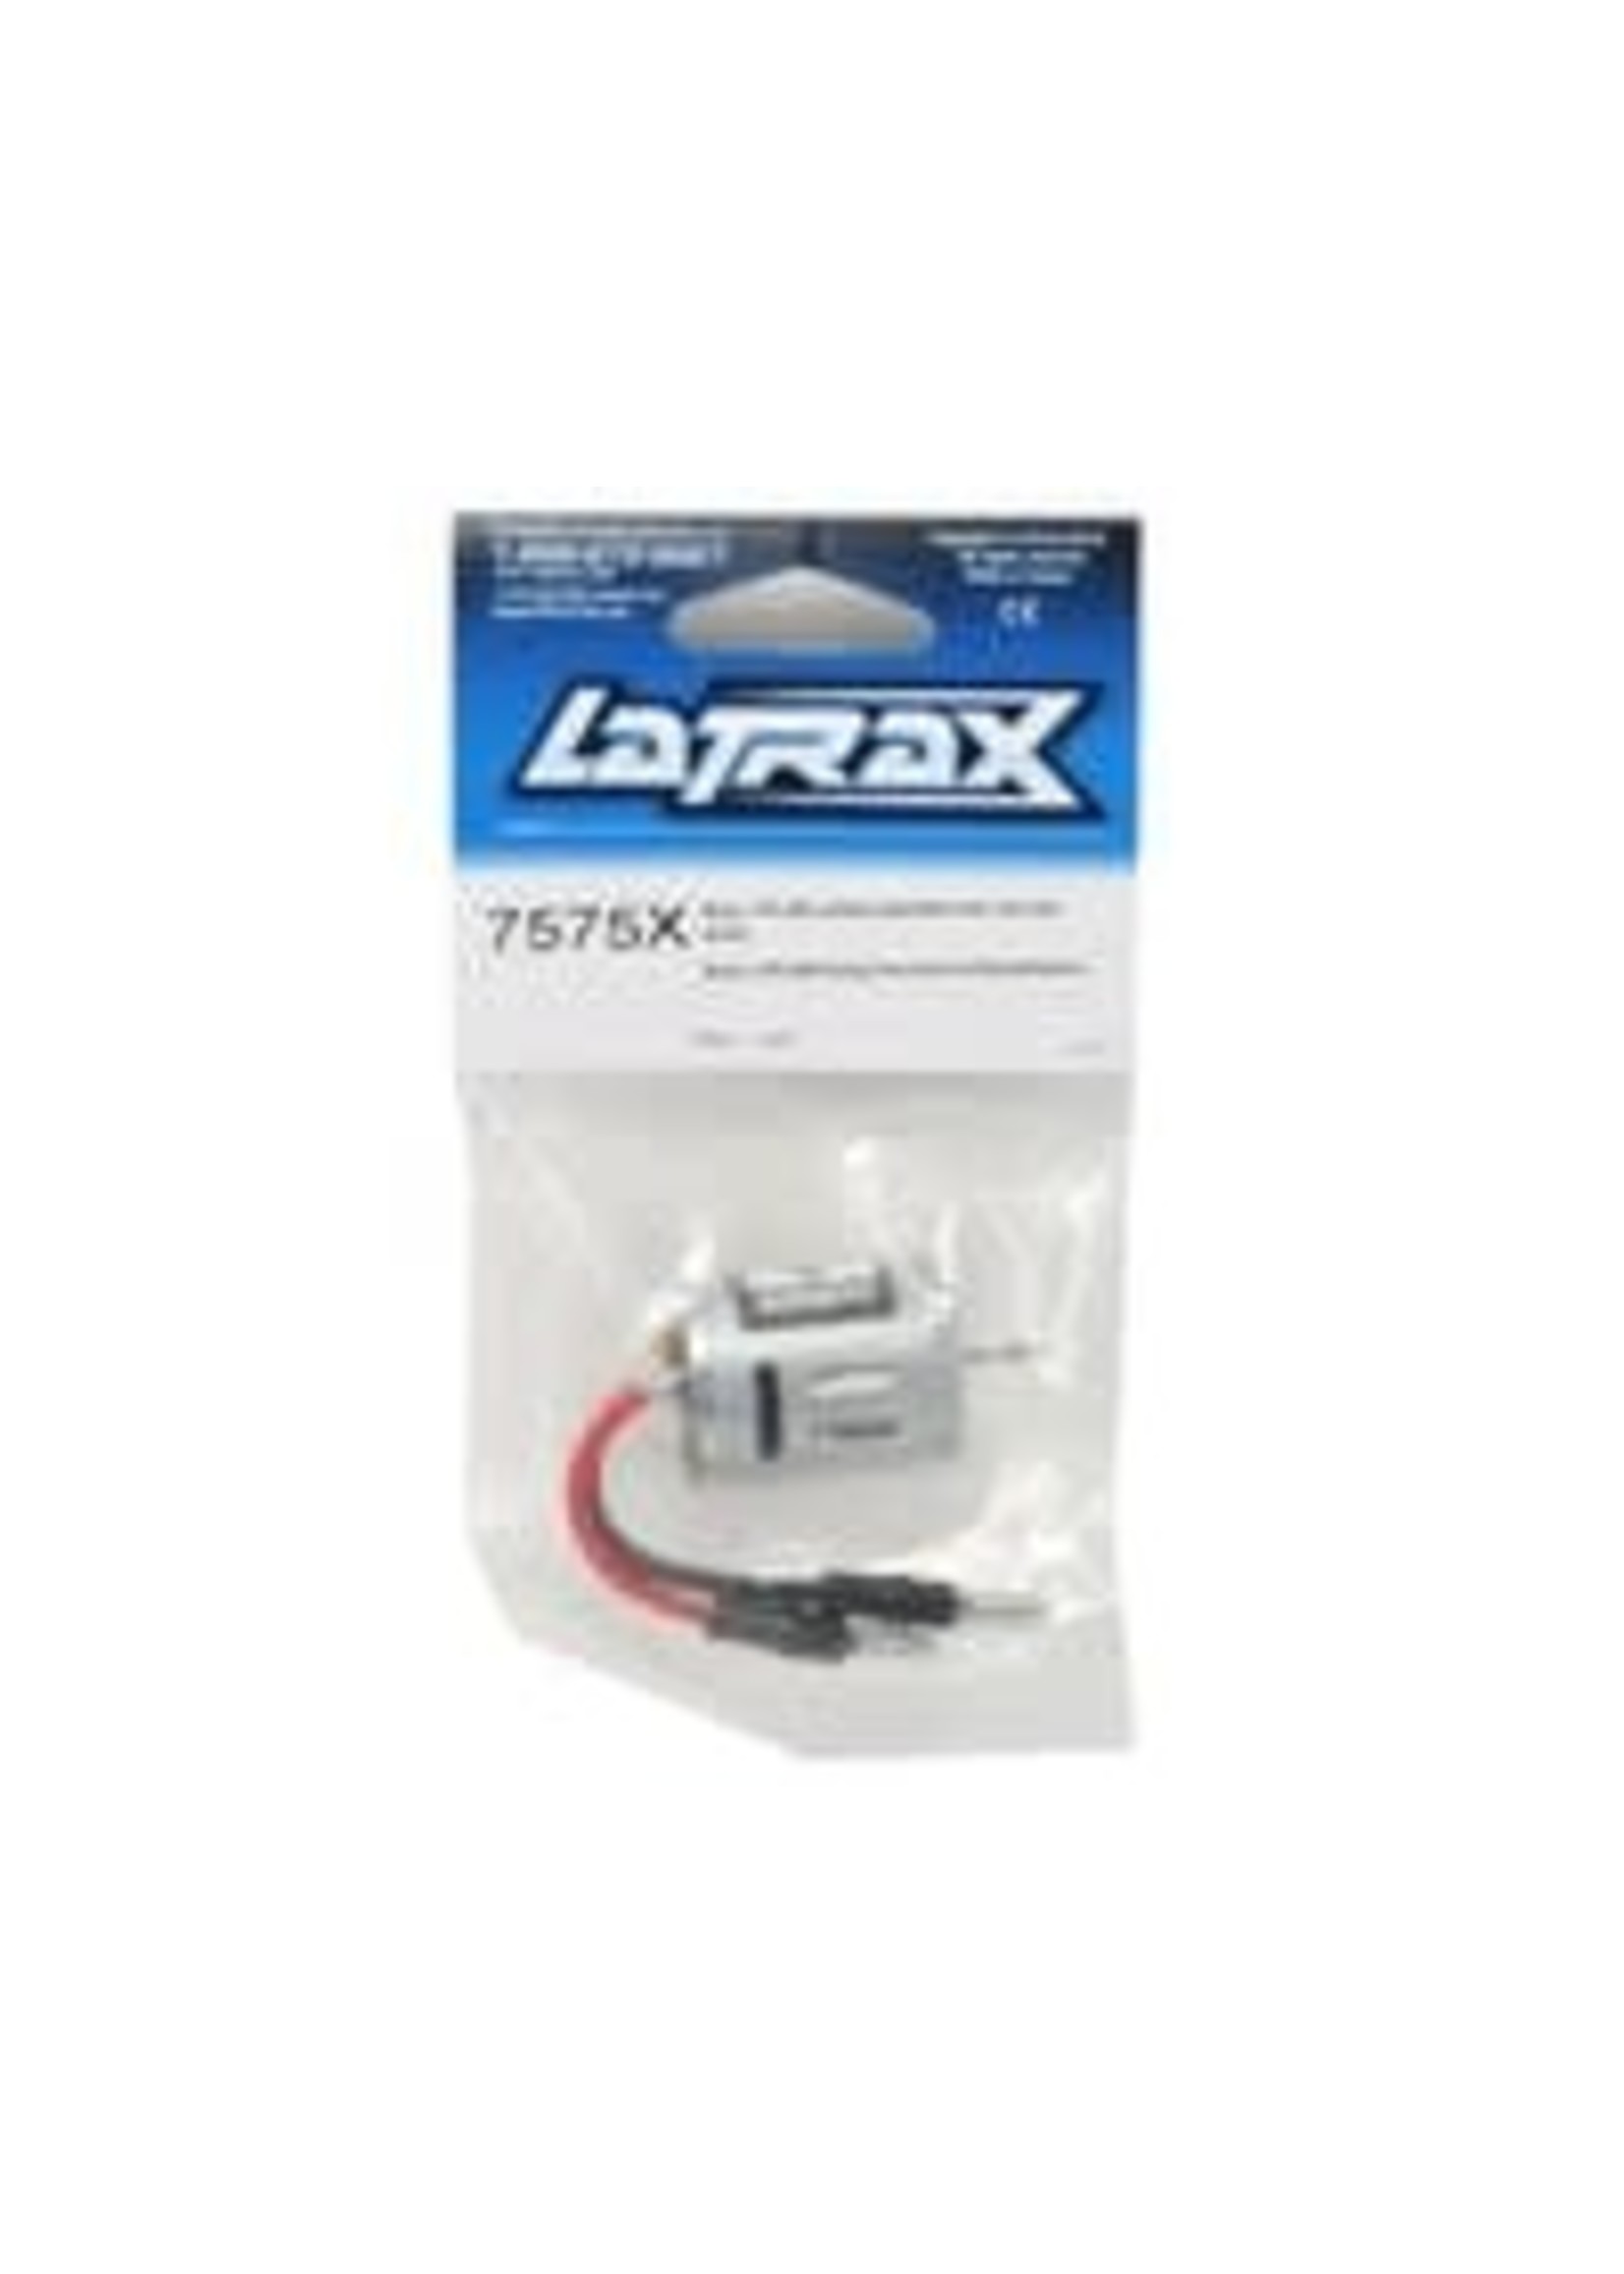 Traxxas 7575X Motor, 370 (28-turn) (assembled with bullet connectors)